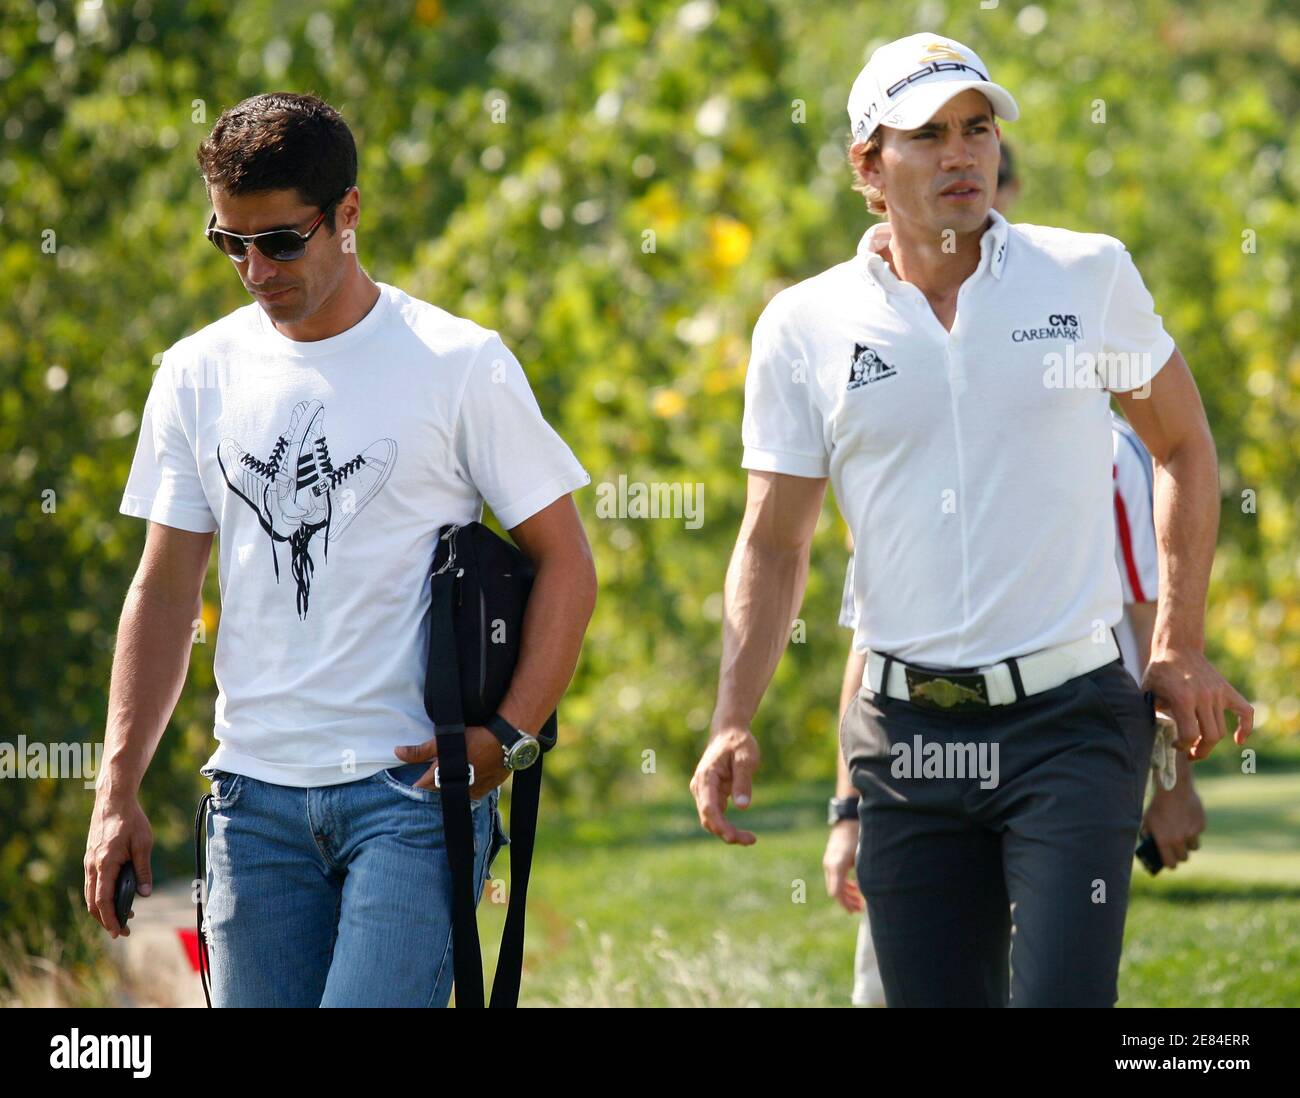 Golfer Camilo Villegas (R) of Colombia walks with New York Red Bulls soccer  player Juan Pablo Angel (L) of Colombia along the 18th fairway during a  practice round for The Barclays golf